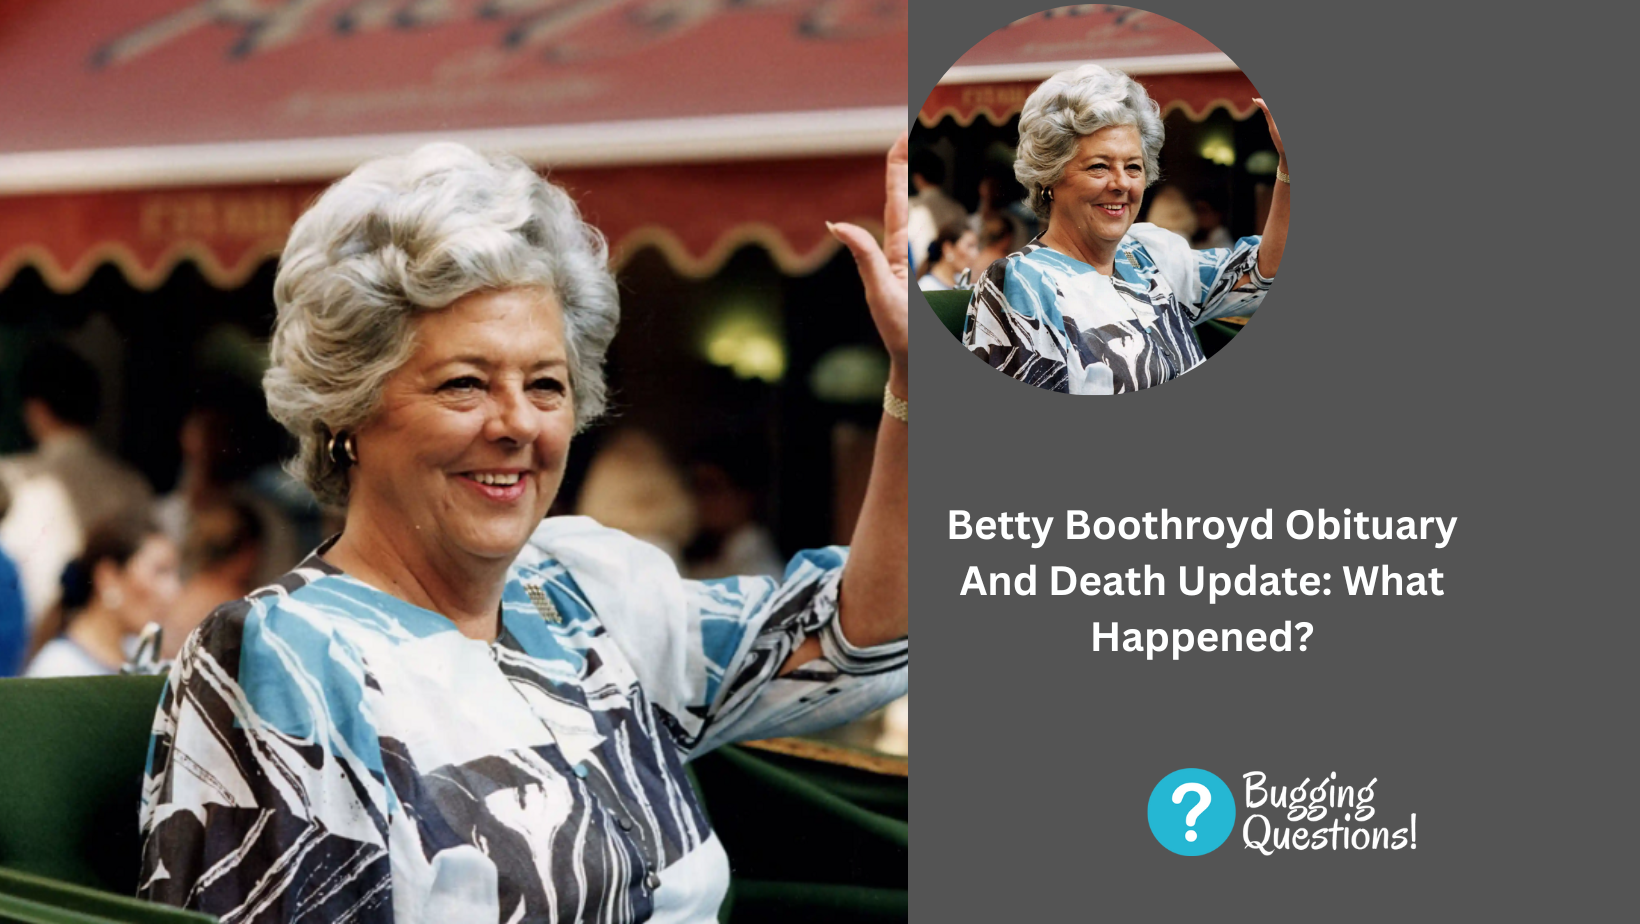 Betty Boothroyd Obituary And Death Update: What Happened?